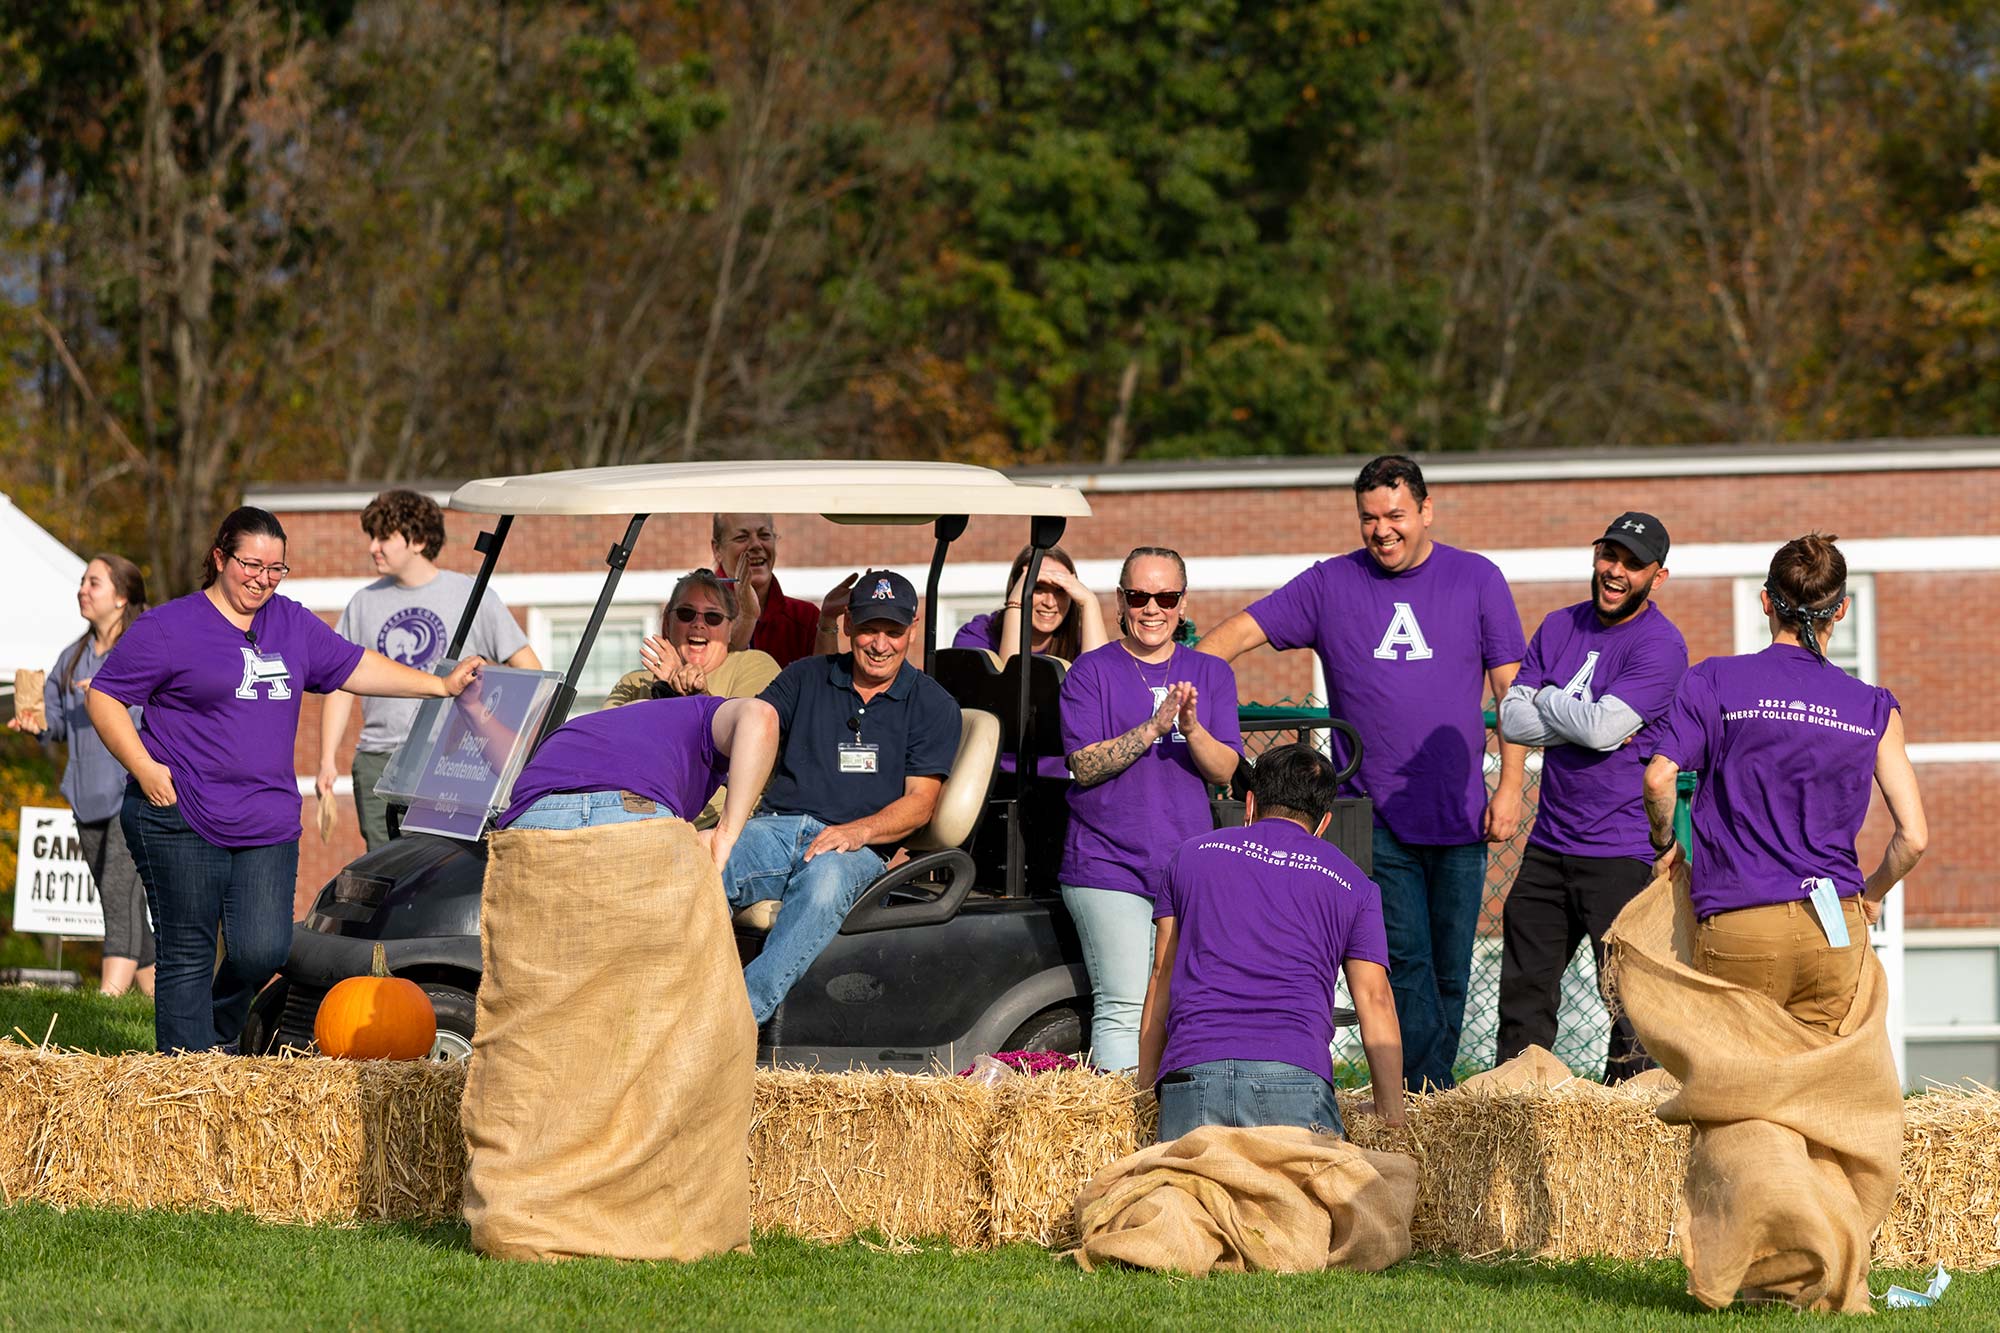 Amherst College staff prepping the academic quad for the bicentennial party